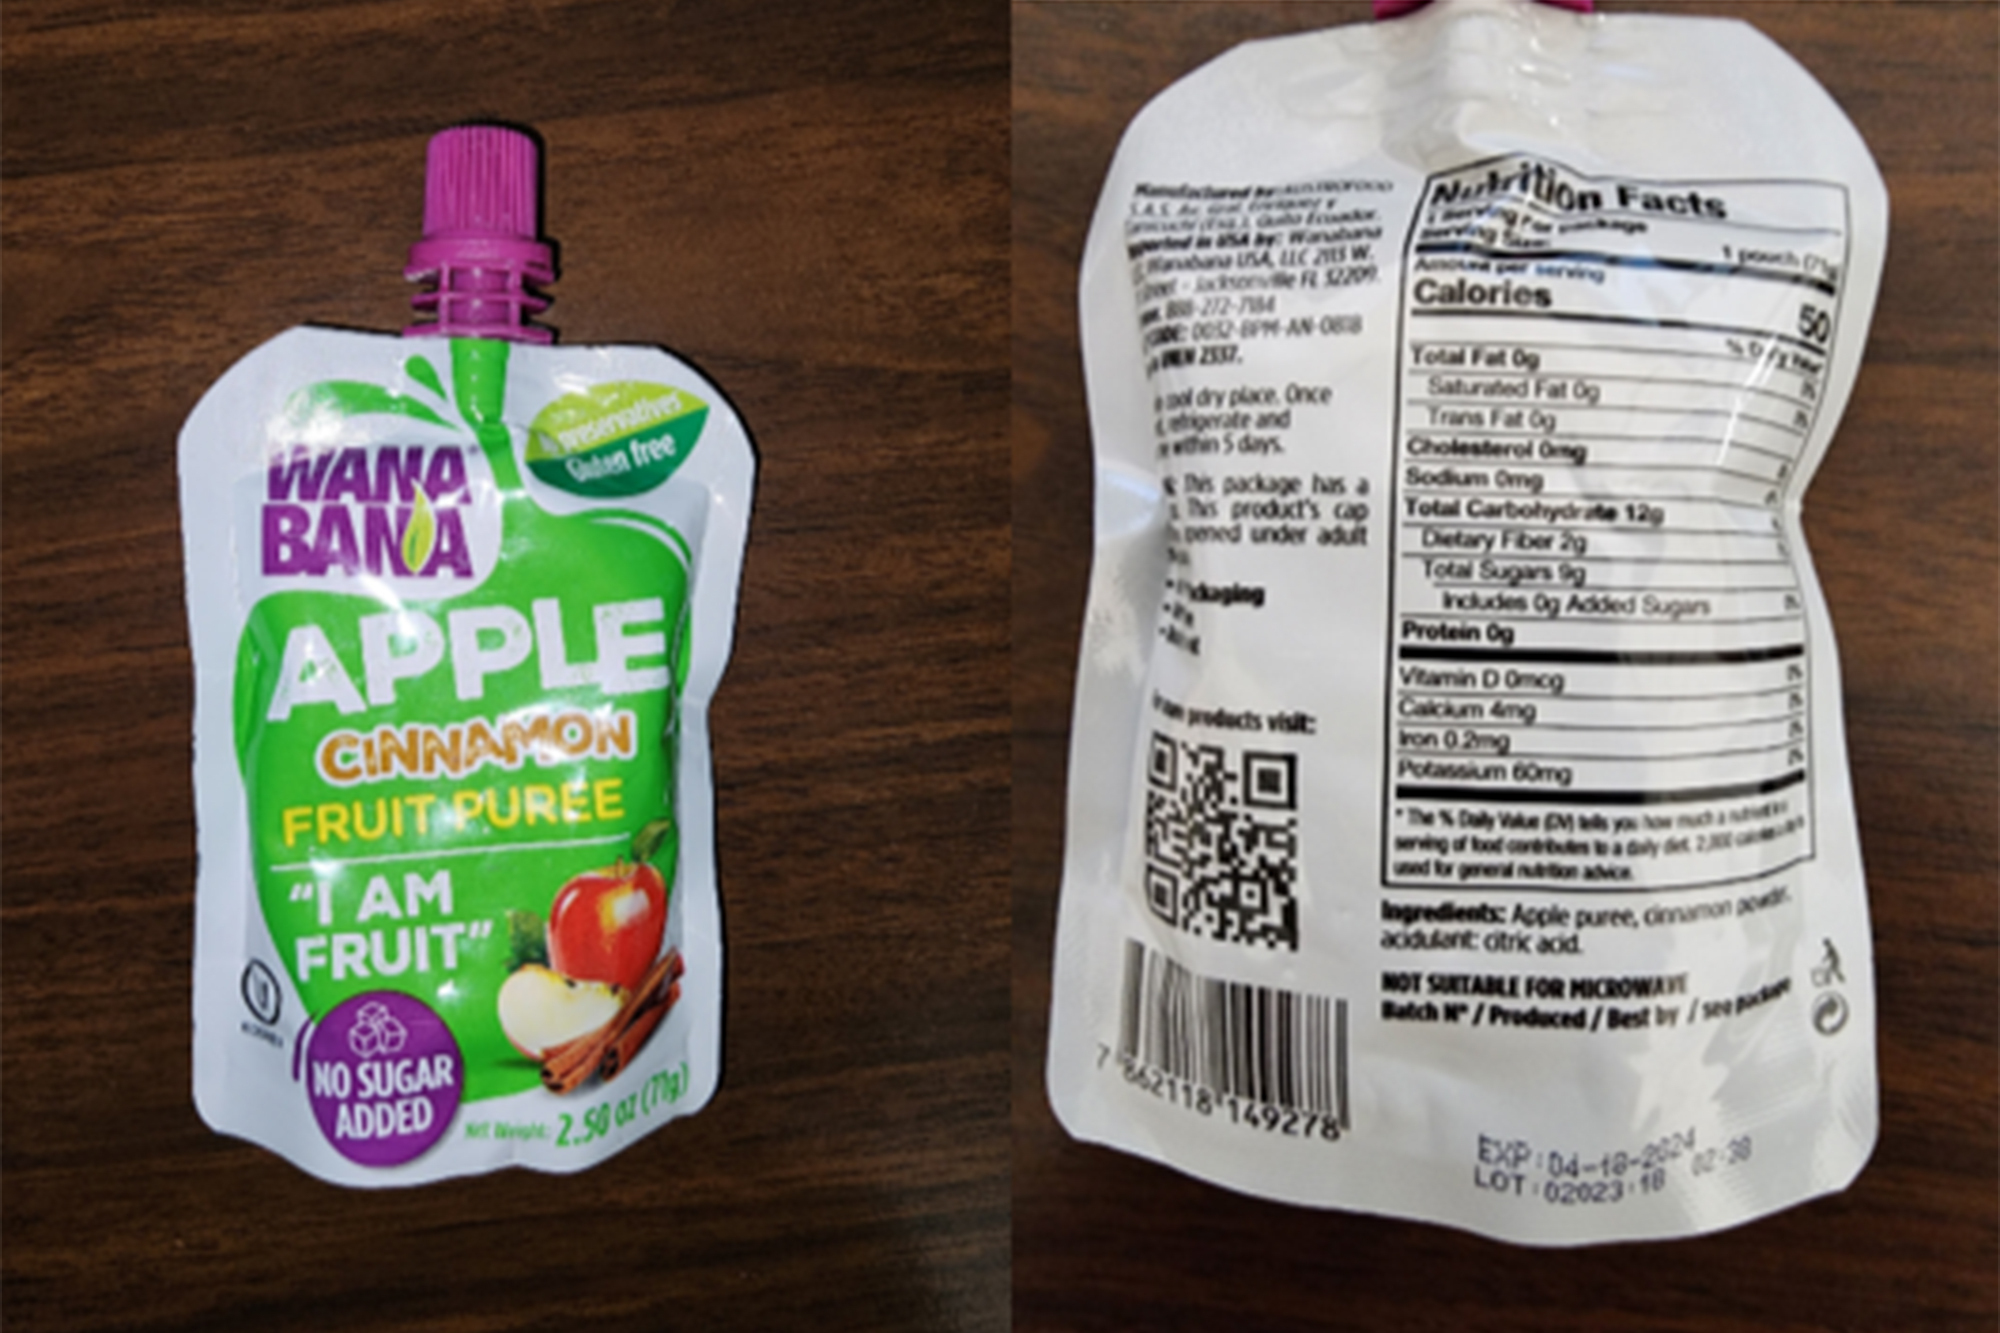 Additional fruit pouches for kids recalled due to lead-related illnesses.